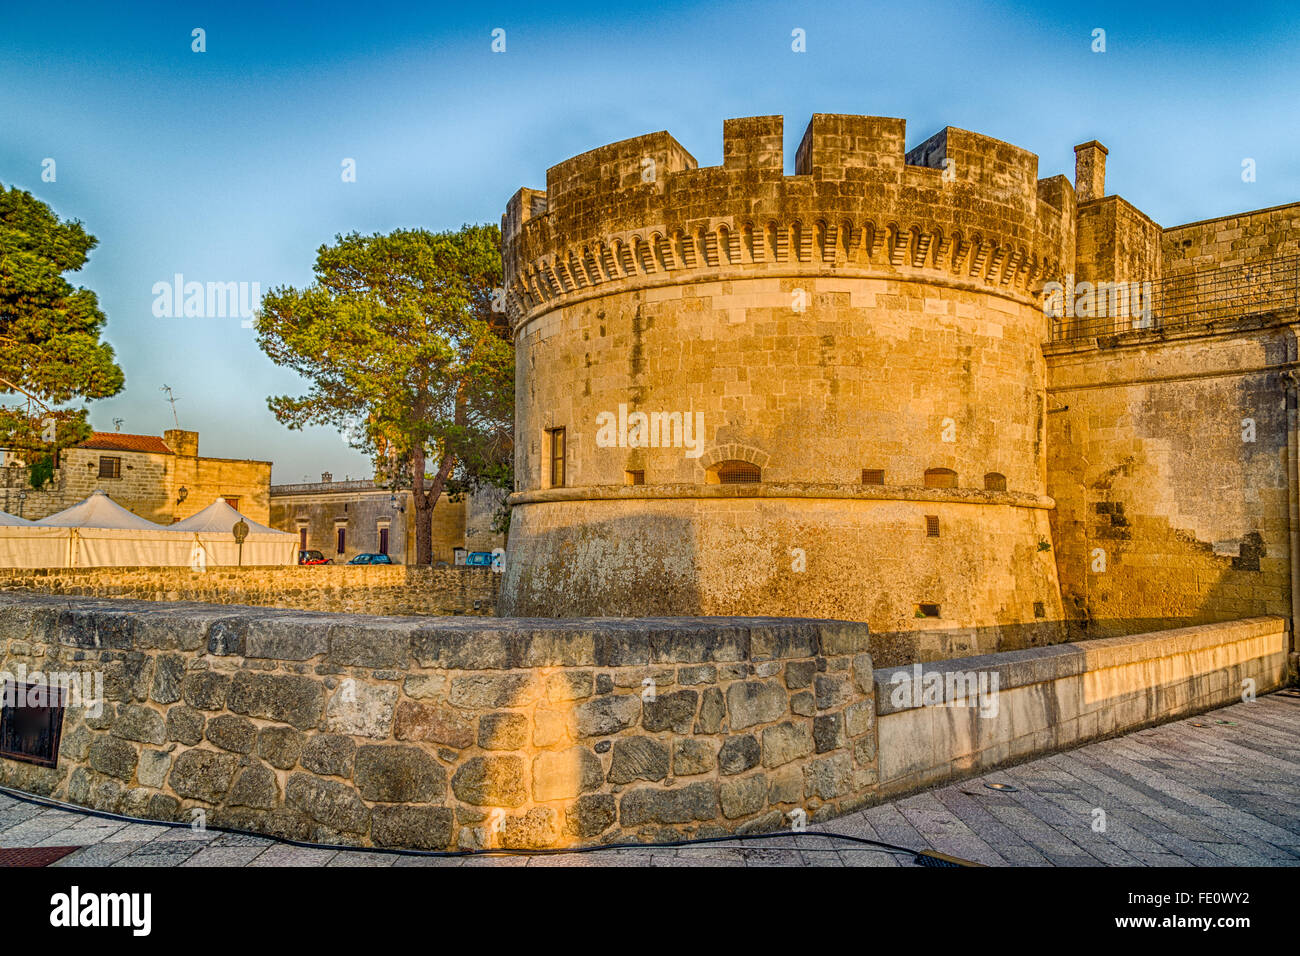 streets and walls of small fortified citadel of XVI century in Italy Stock Photo